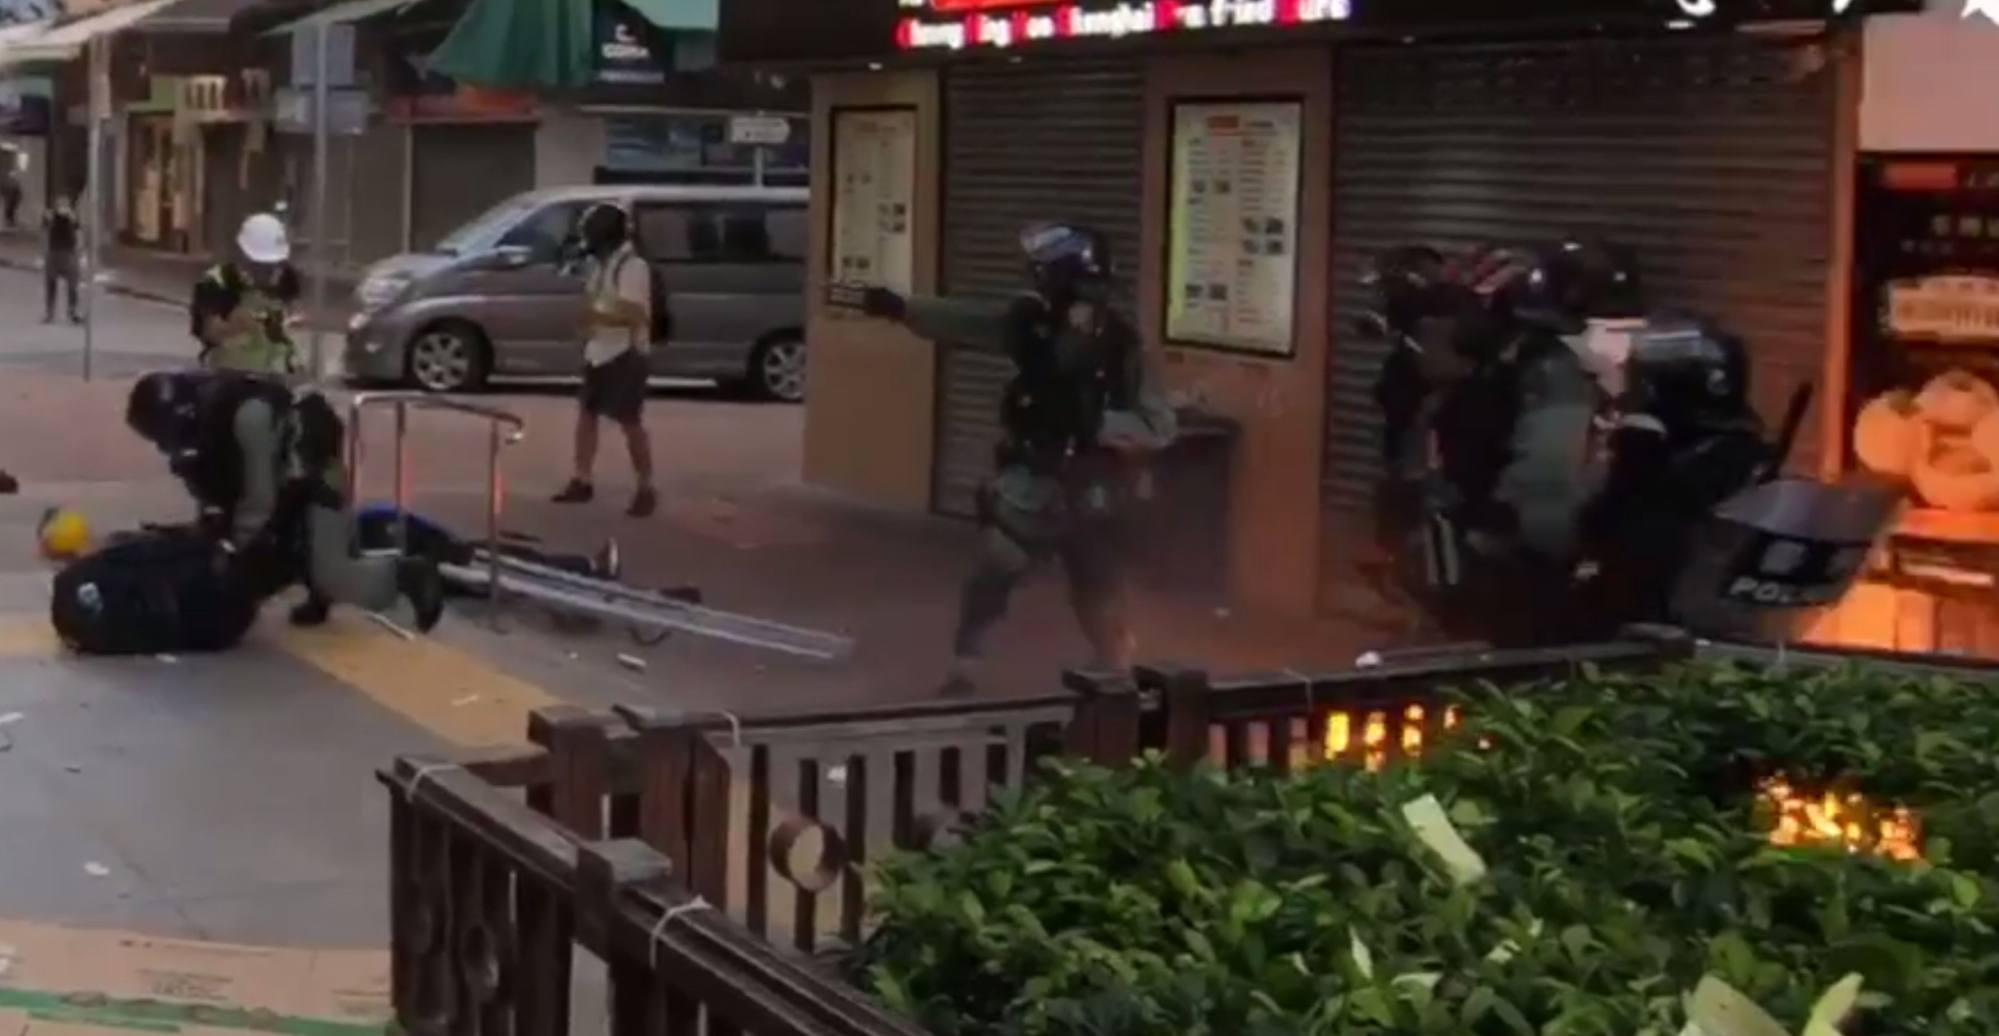 Footage from 2019 showing a violent protest in Tsuen Wan in which a police officer opens fire after his colleague is attacked. Photo: Handout